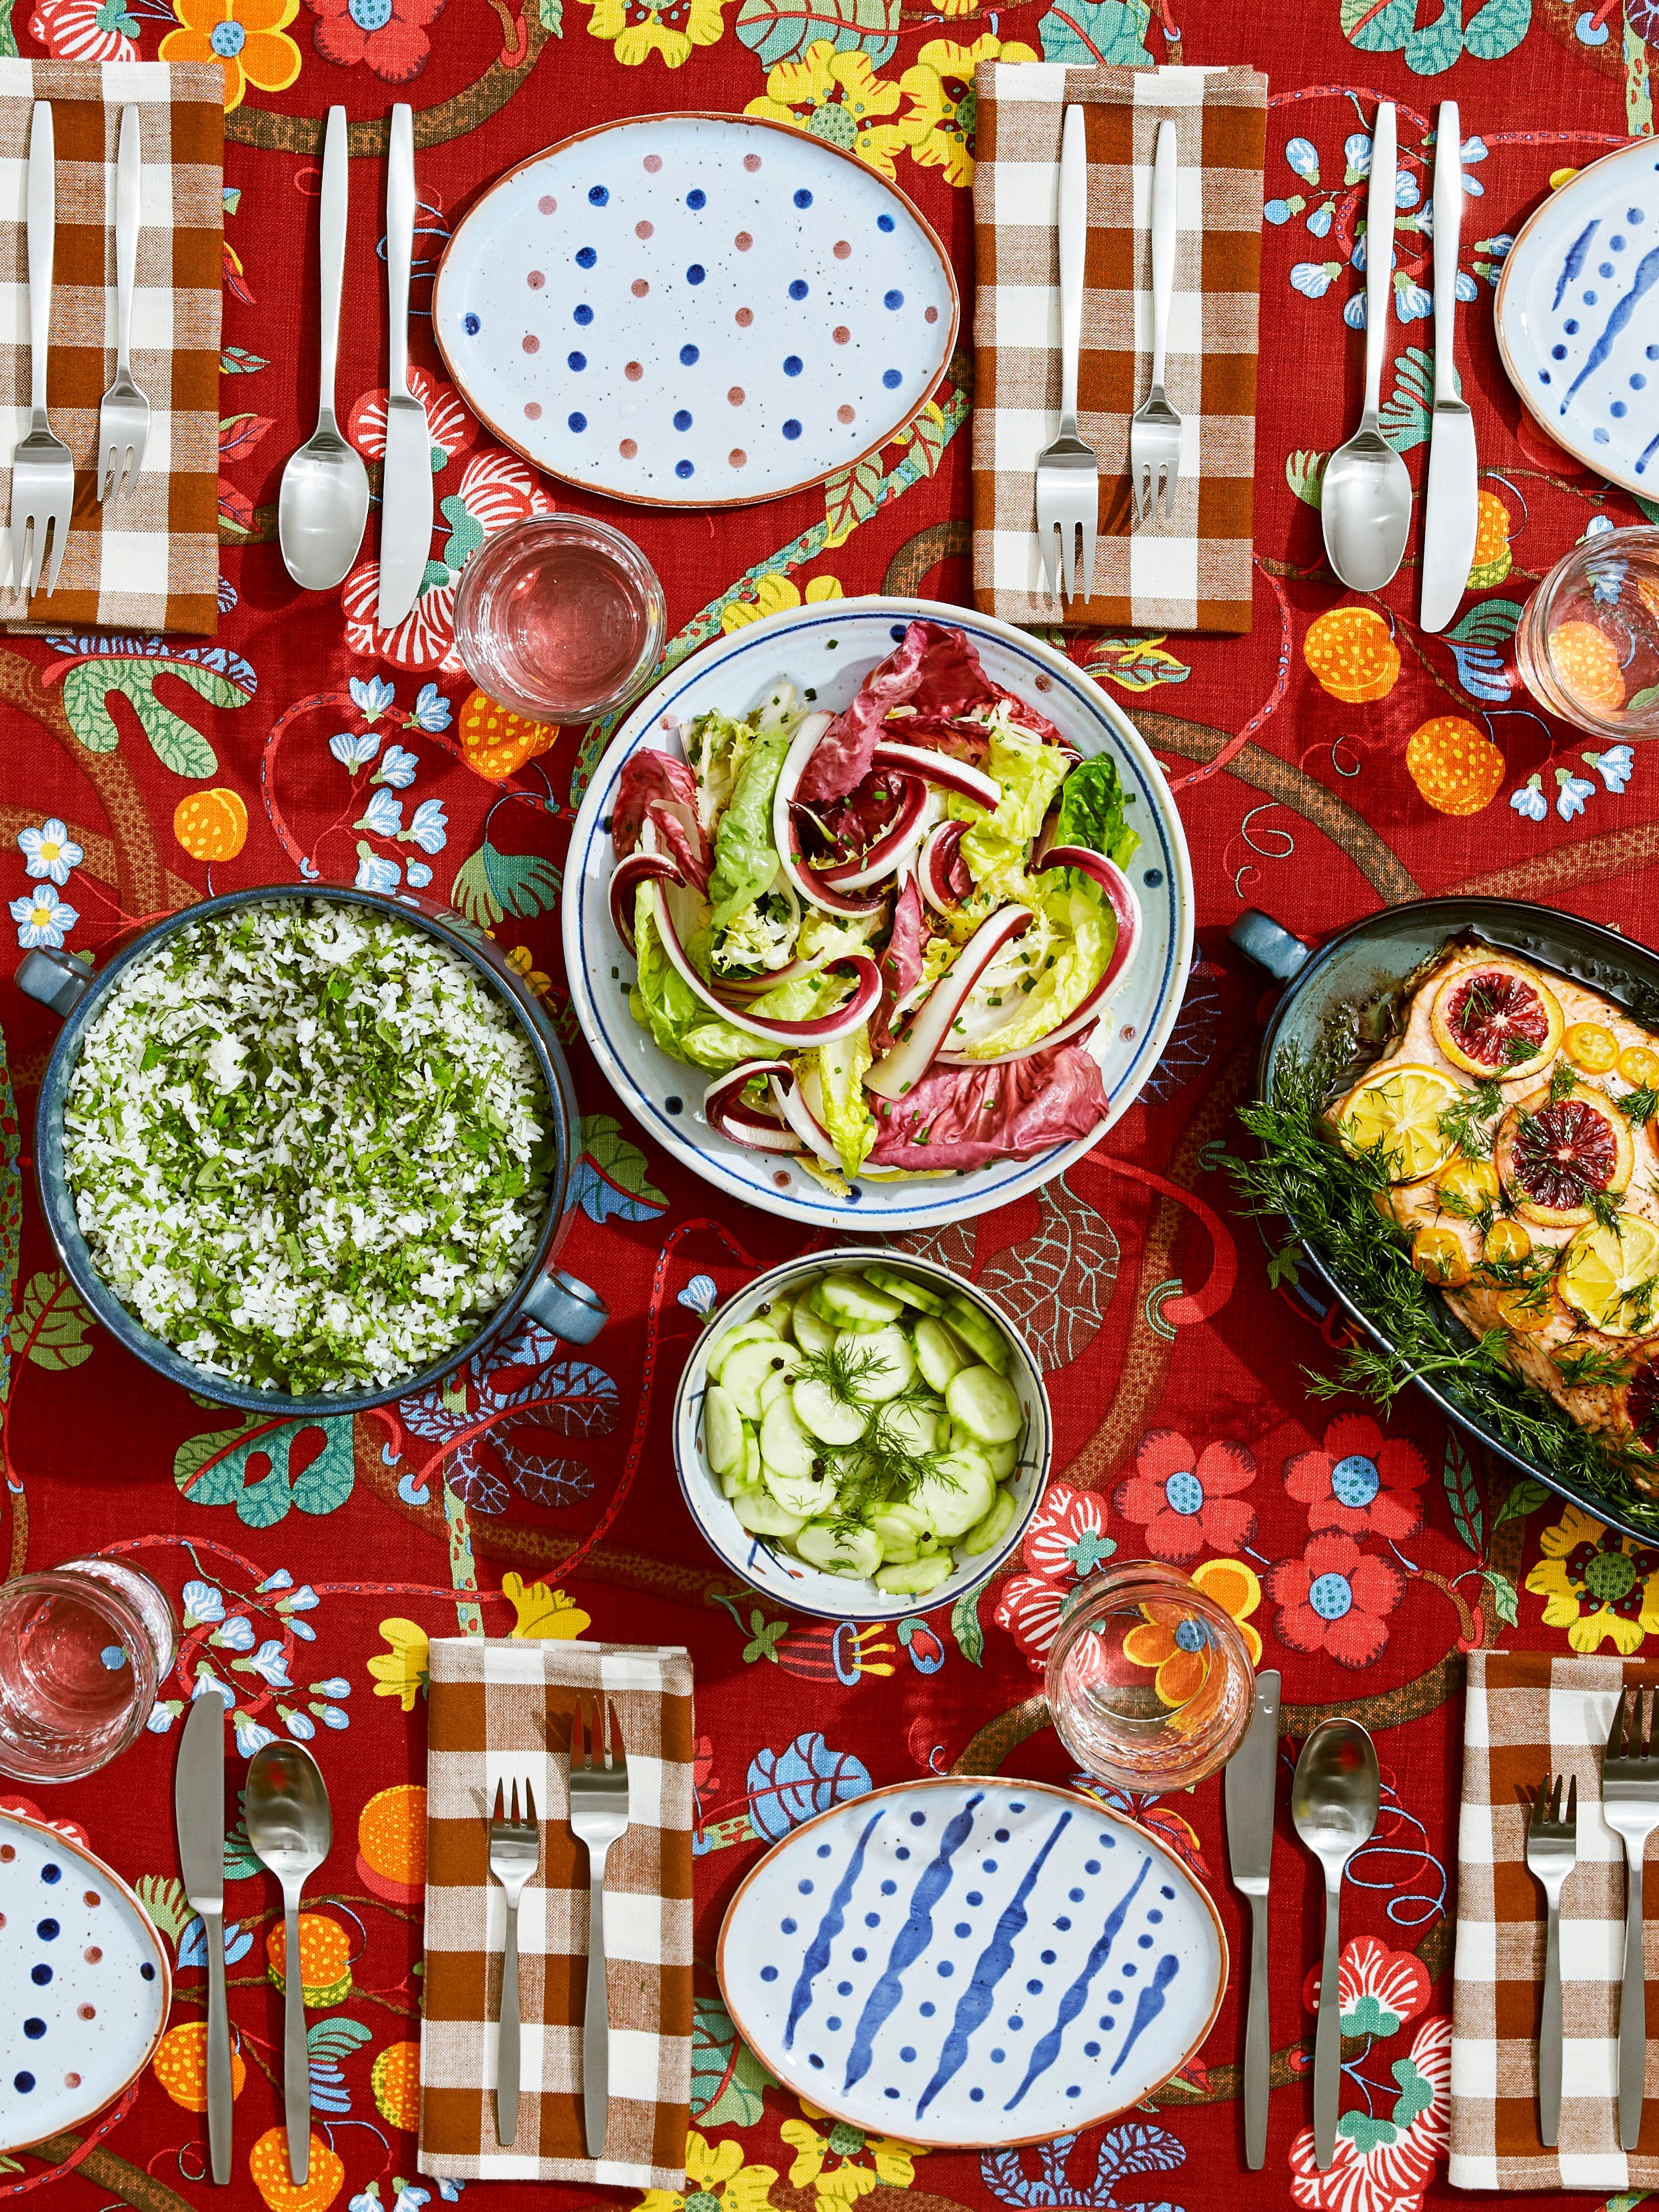 How to Host a Casual Spring Get-Together